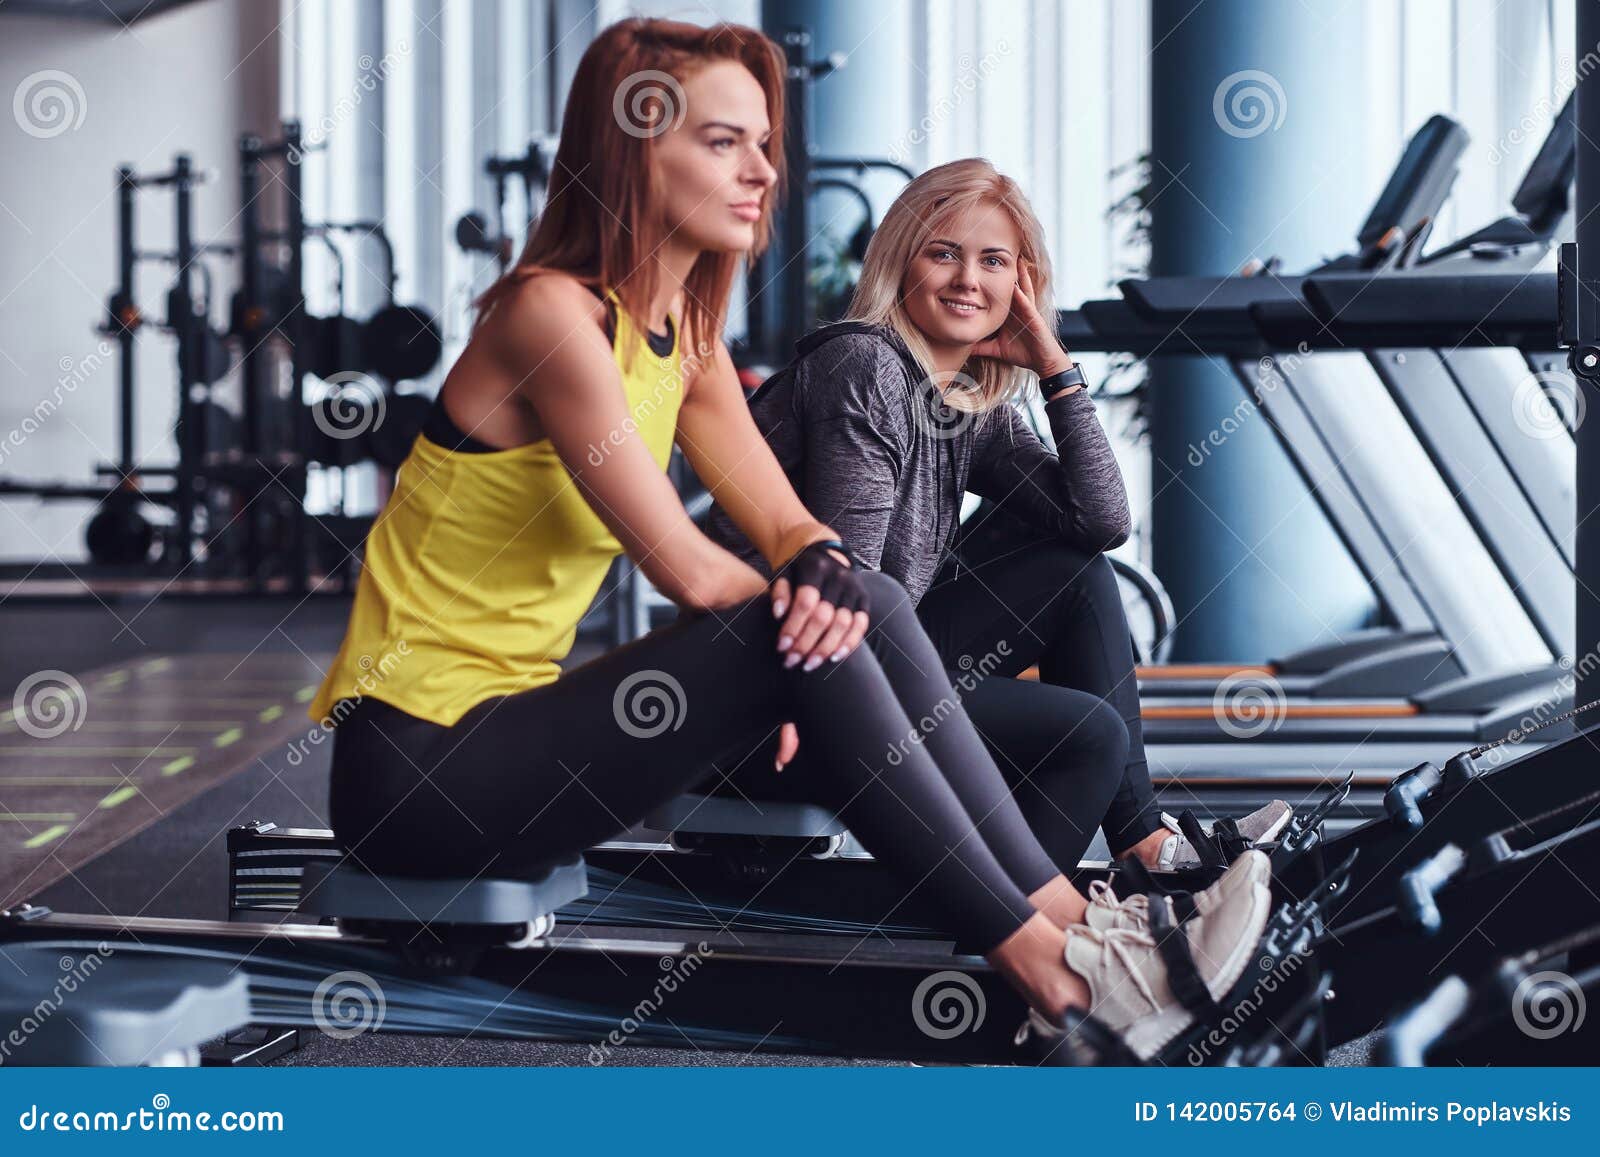 Two Beautiful Young Women Sitting On Rowing Machines At The Gym. Stock ...